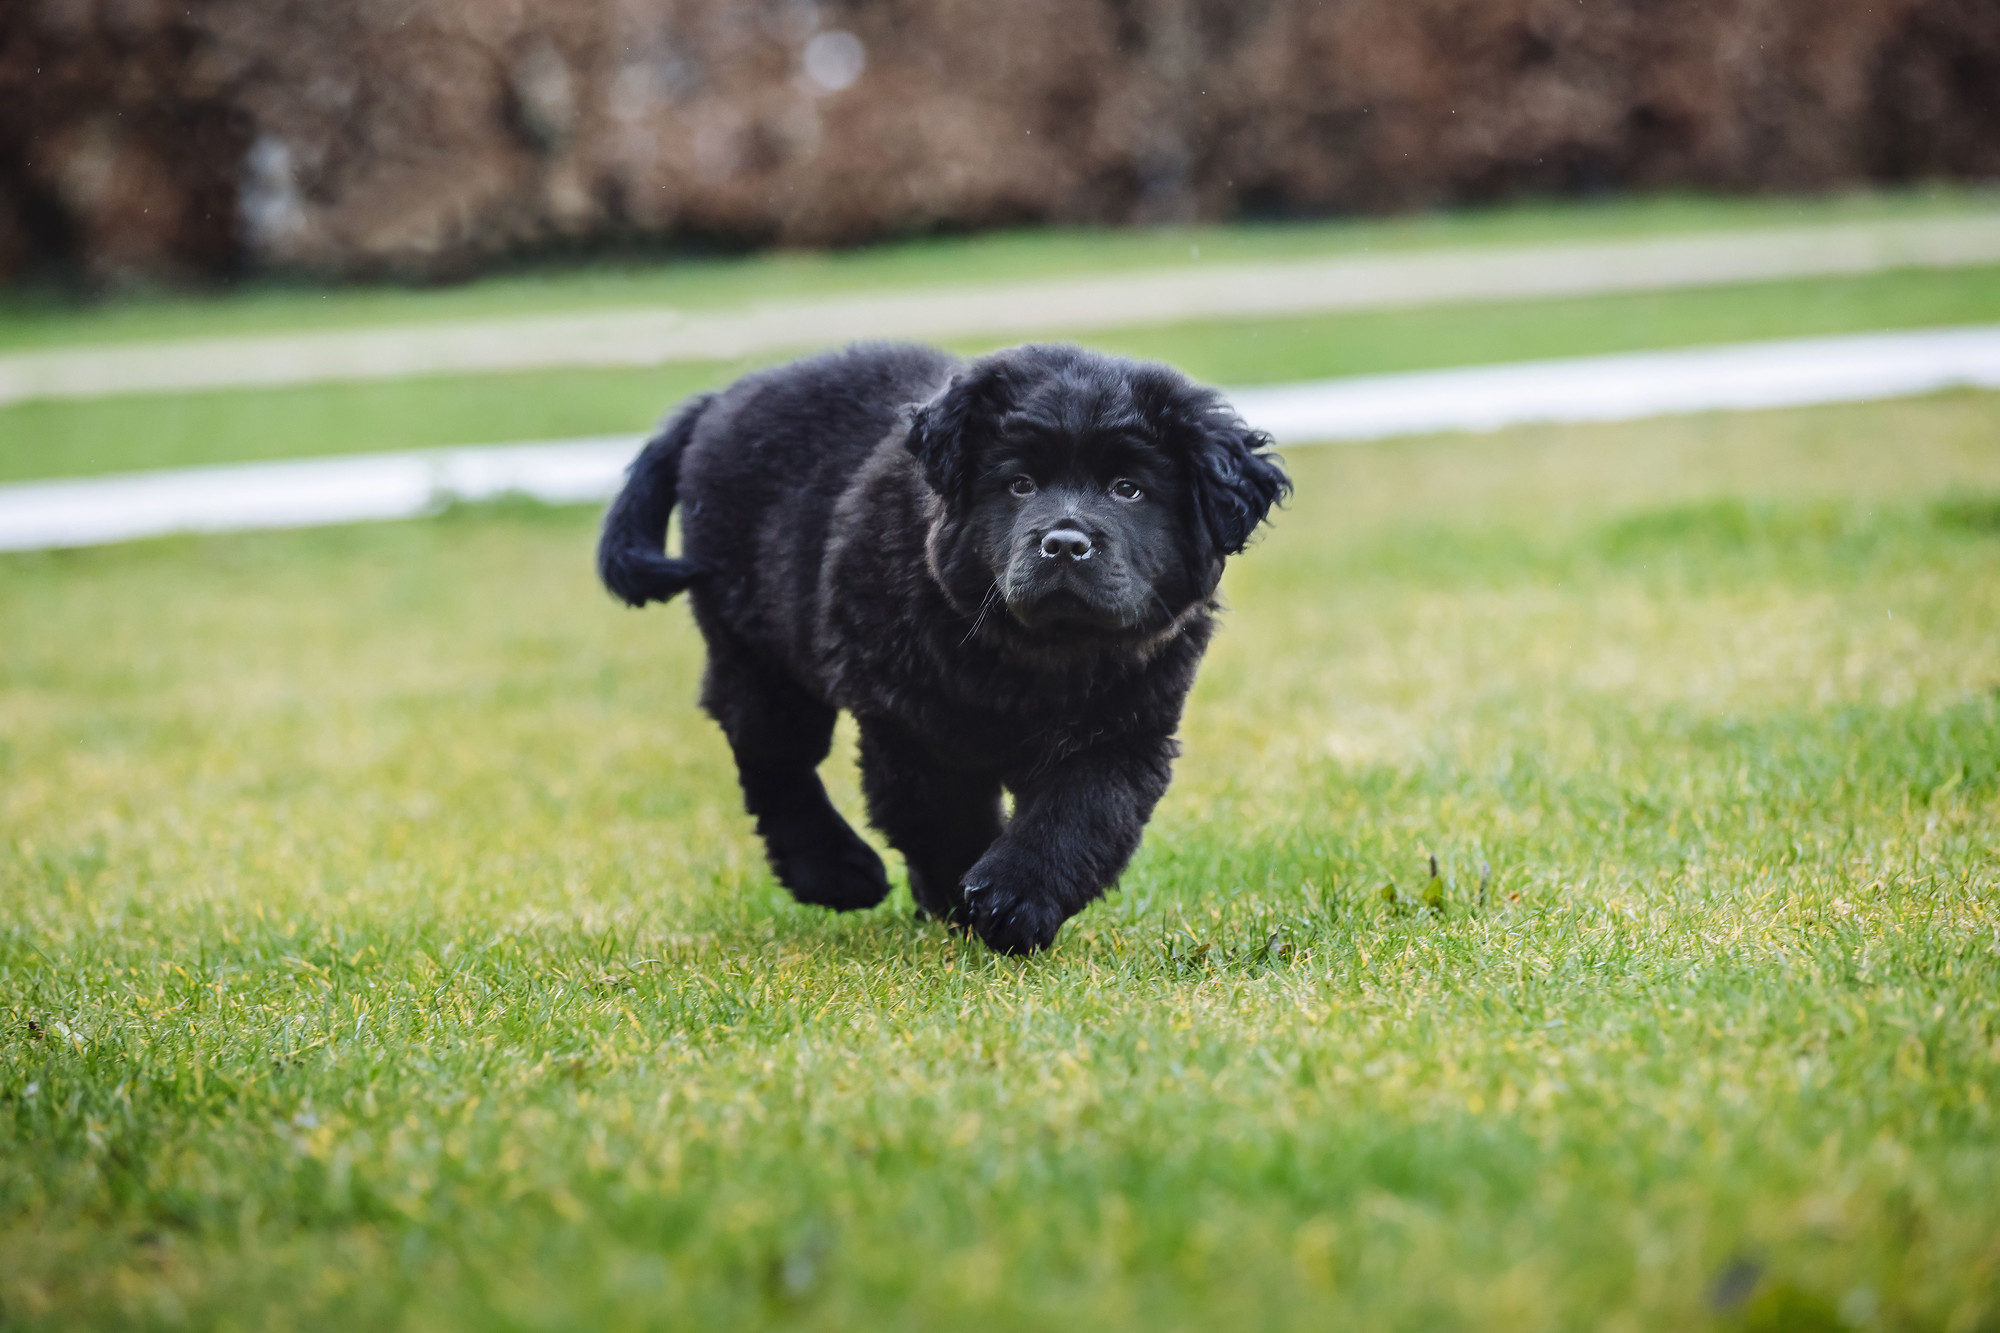 Black dog playing on the grass